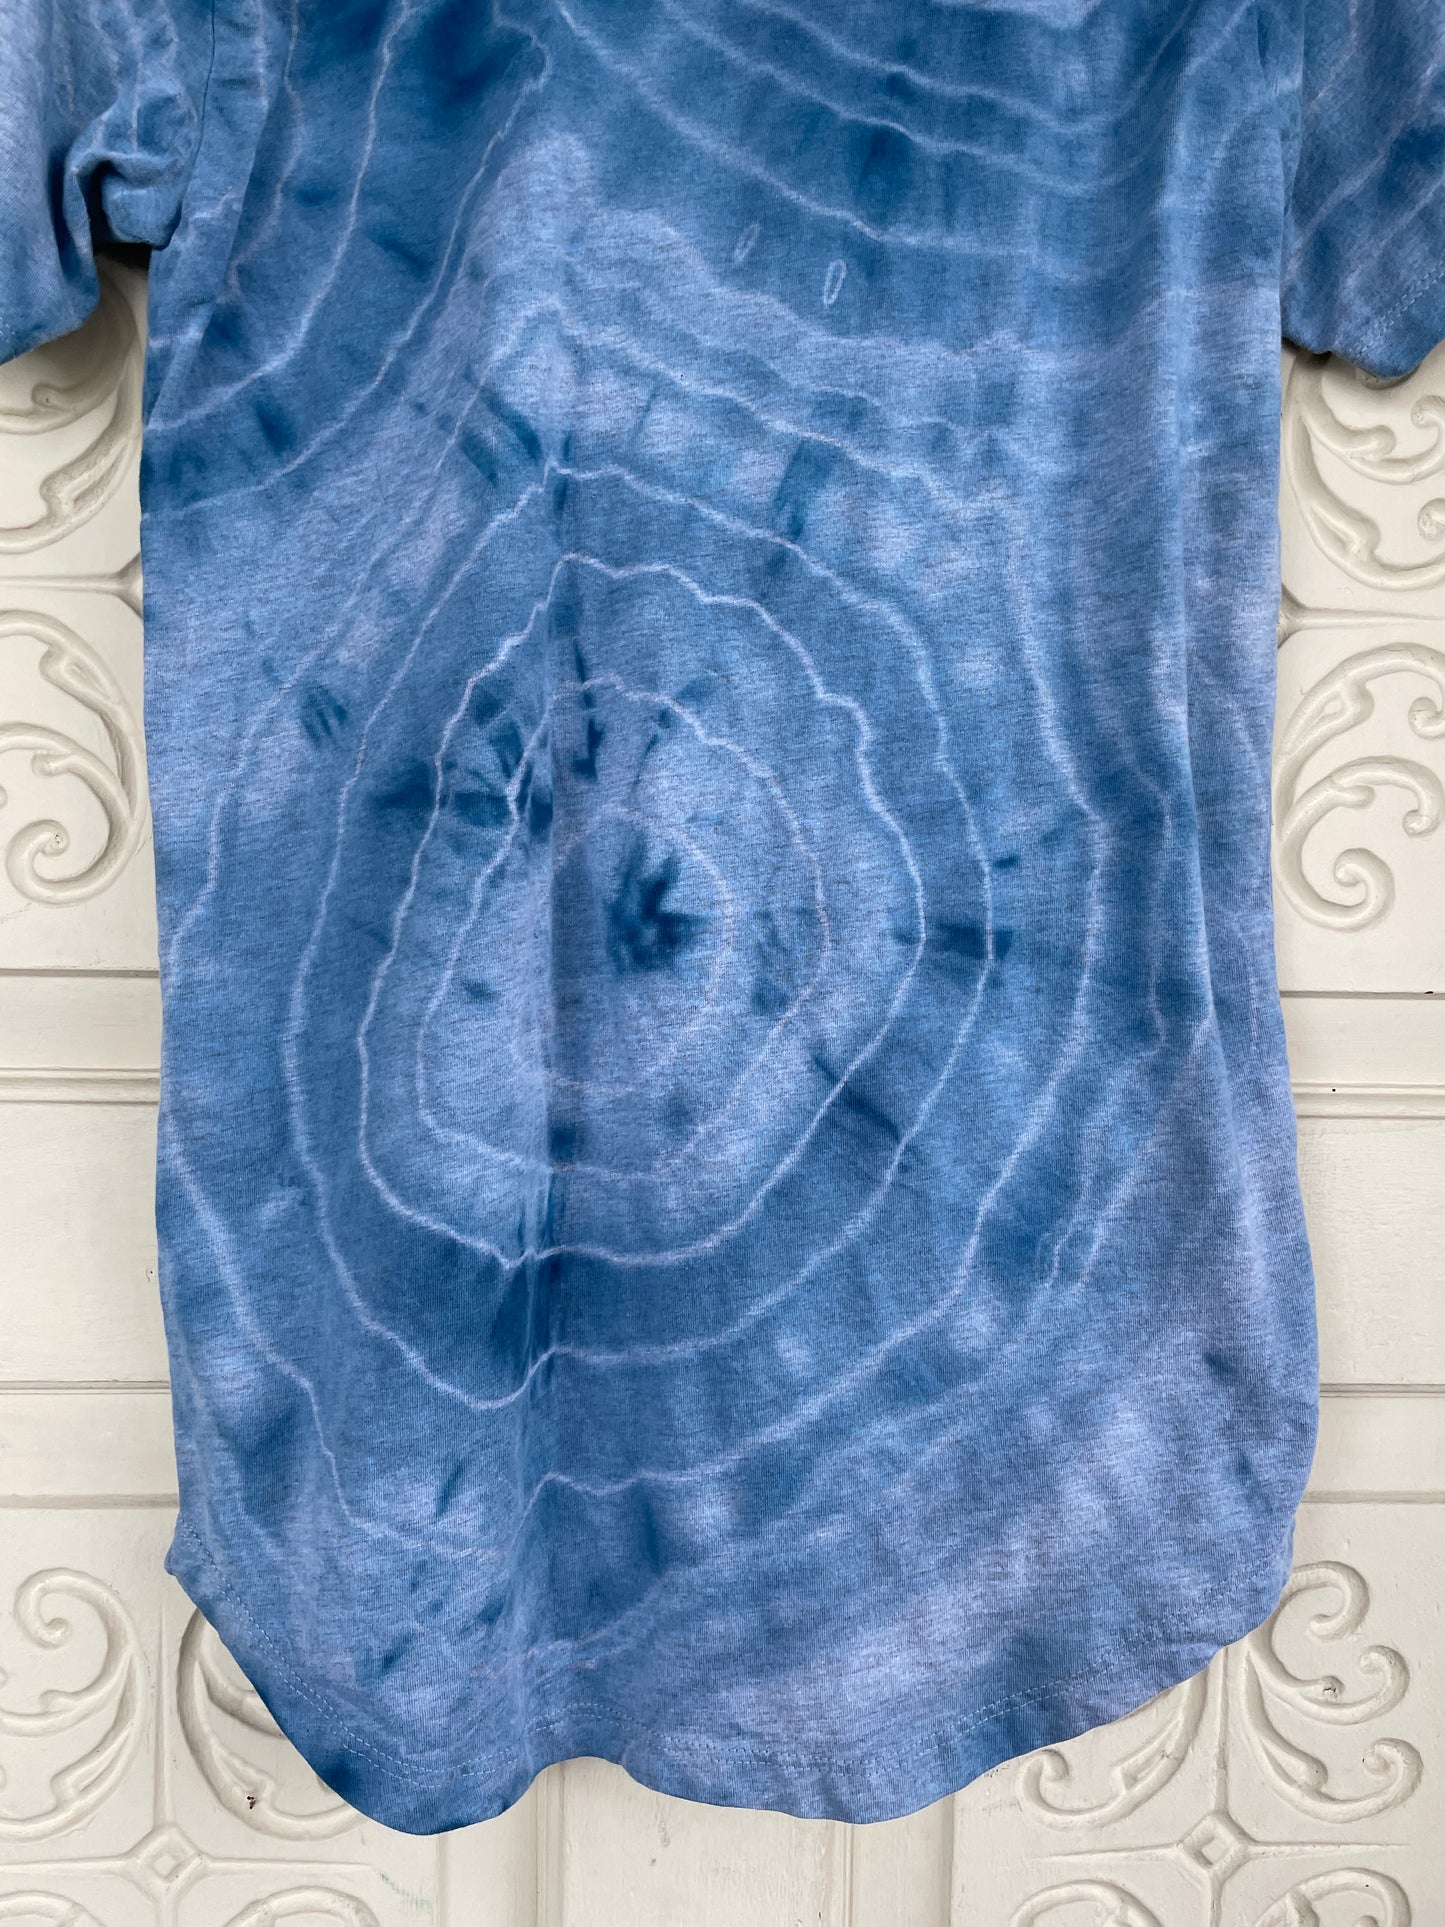 Small Men's Groovy Alien Handmade Galaxy Geode Tie Dye Long-Line T-Shirt | One-Of-a-Kind Upcycled Blue and Gray Short Sleeve Shirt